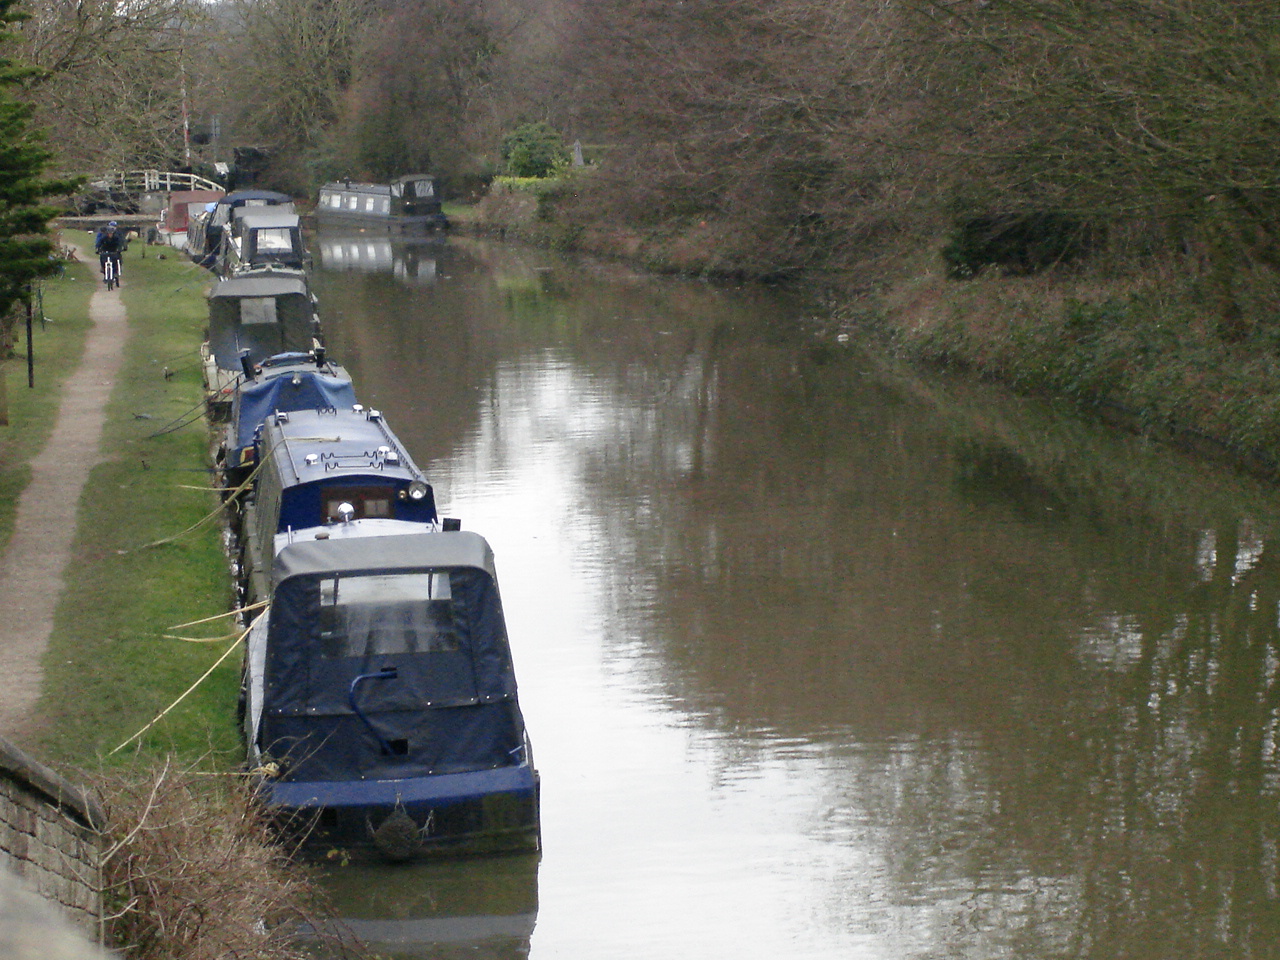 a canal with several boats passing on it